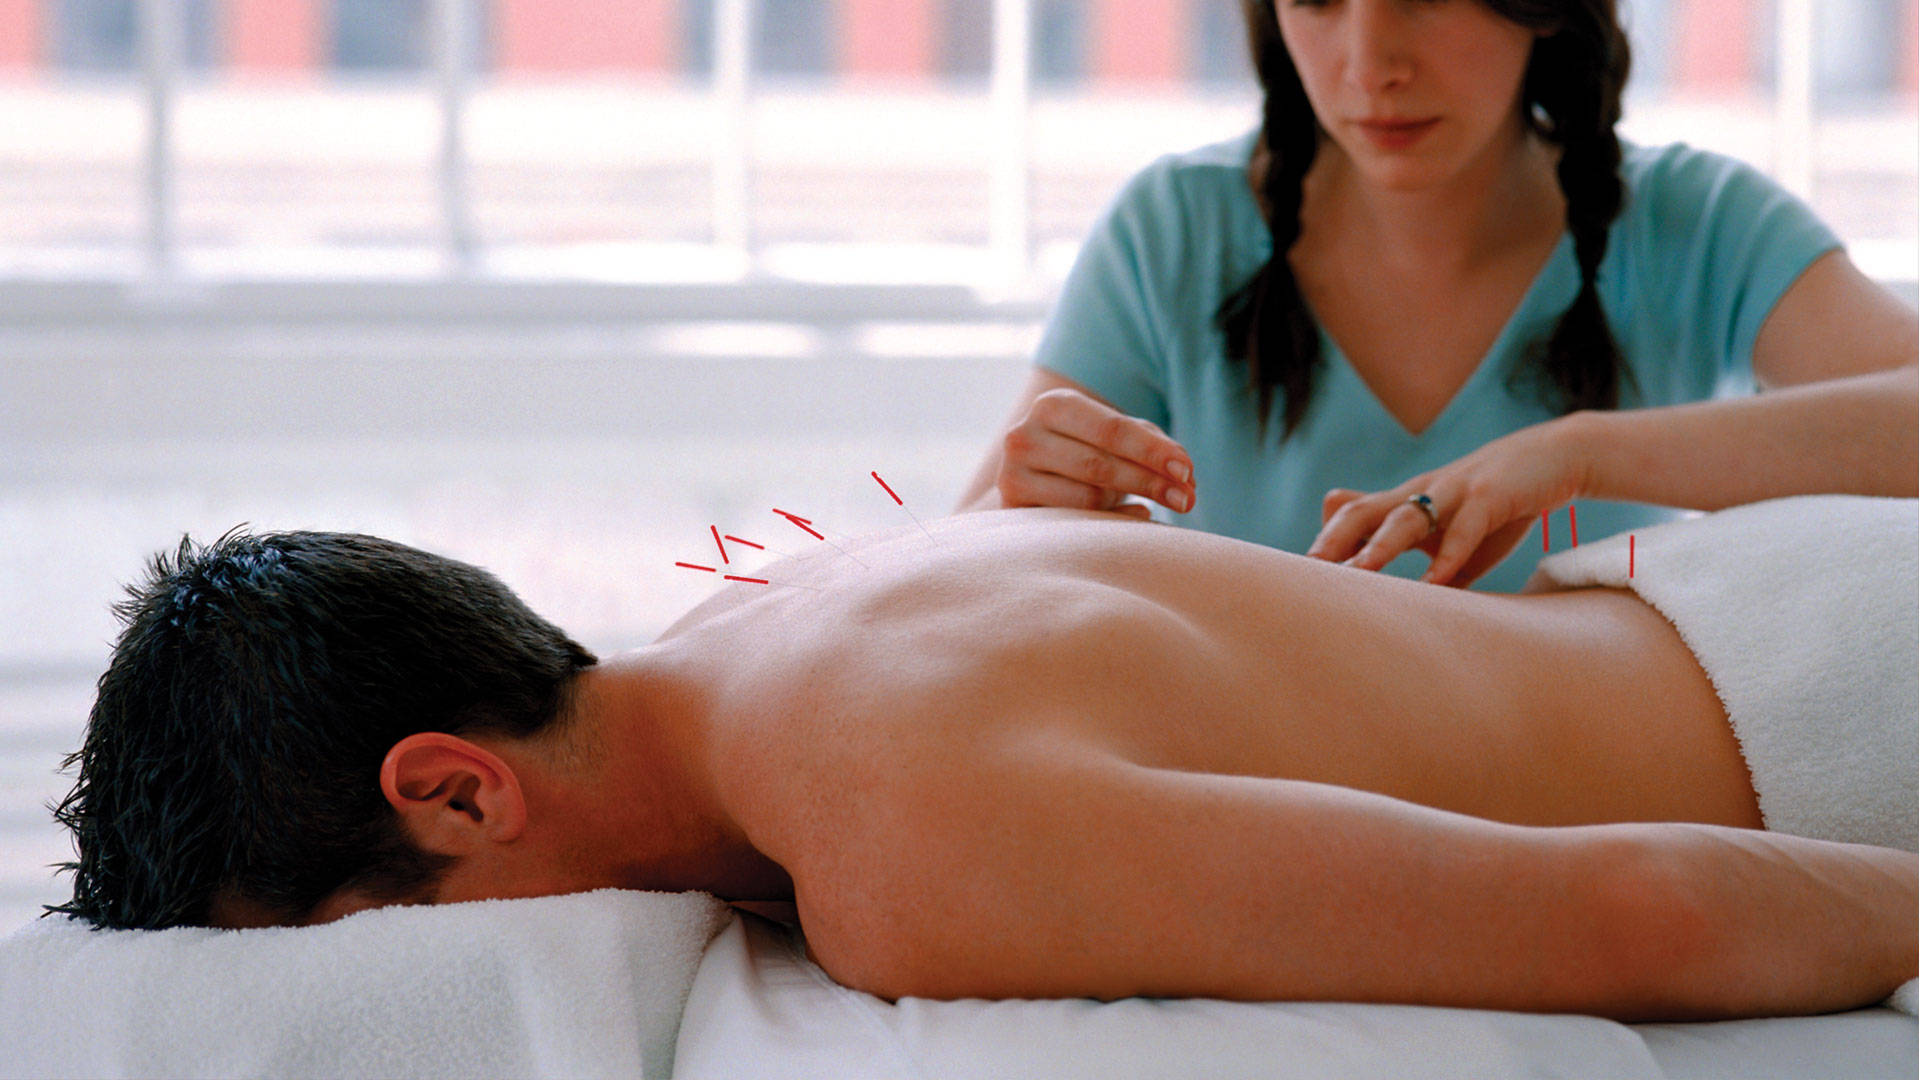 Acupuncturist Back Needle Insertion Wallpaper